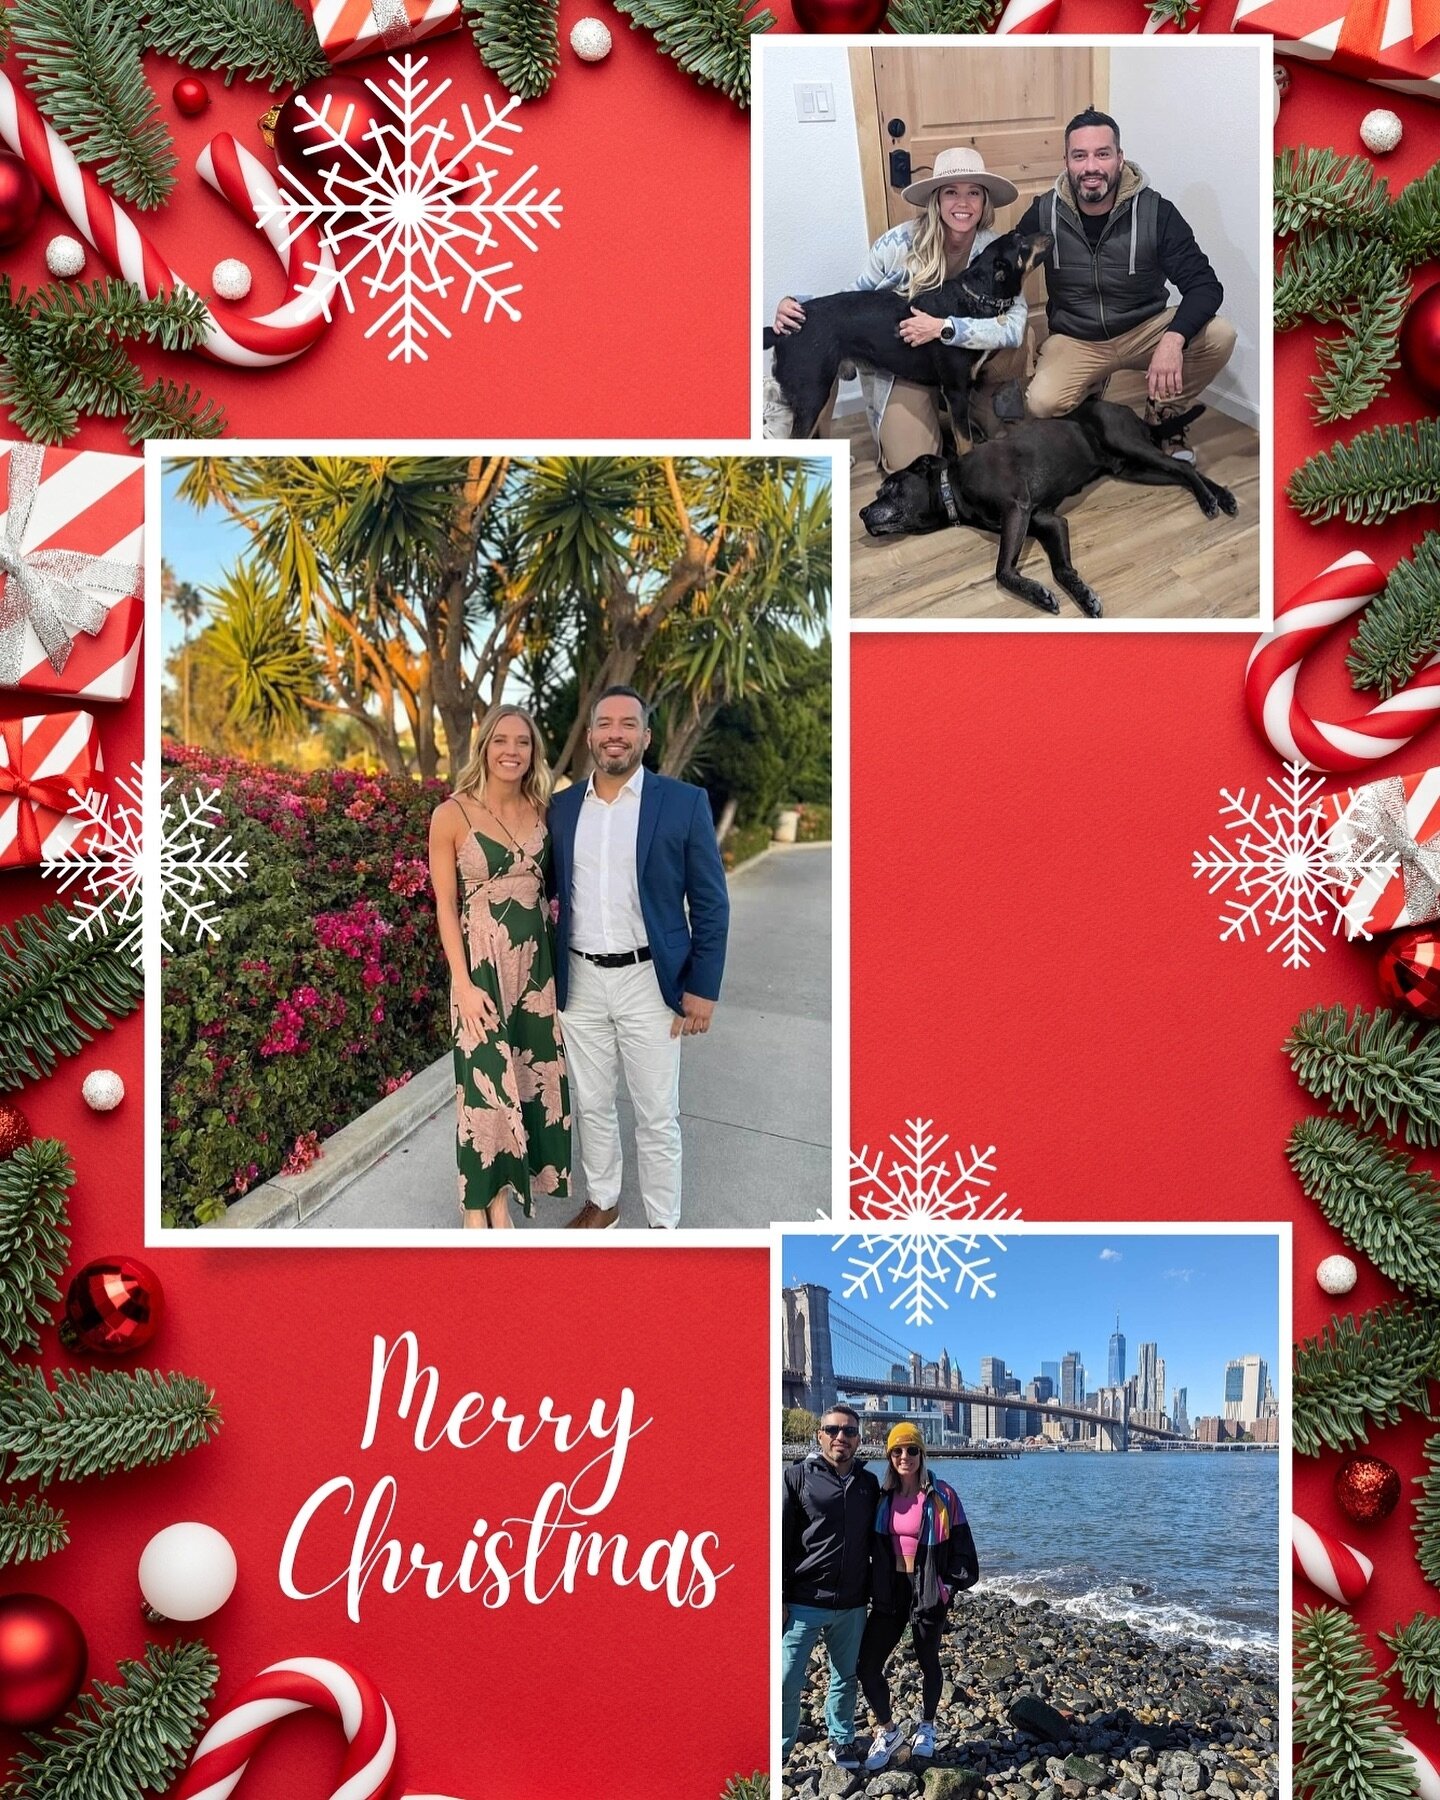 Merry Christmas and Happy Holidays From The Millenia Team
 
We are so blessed to have you as a part of our So Cal real estate family...

Part of our core values is to treat everyone like family, and that's what we do...

So, we hope you enjoy your ti